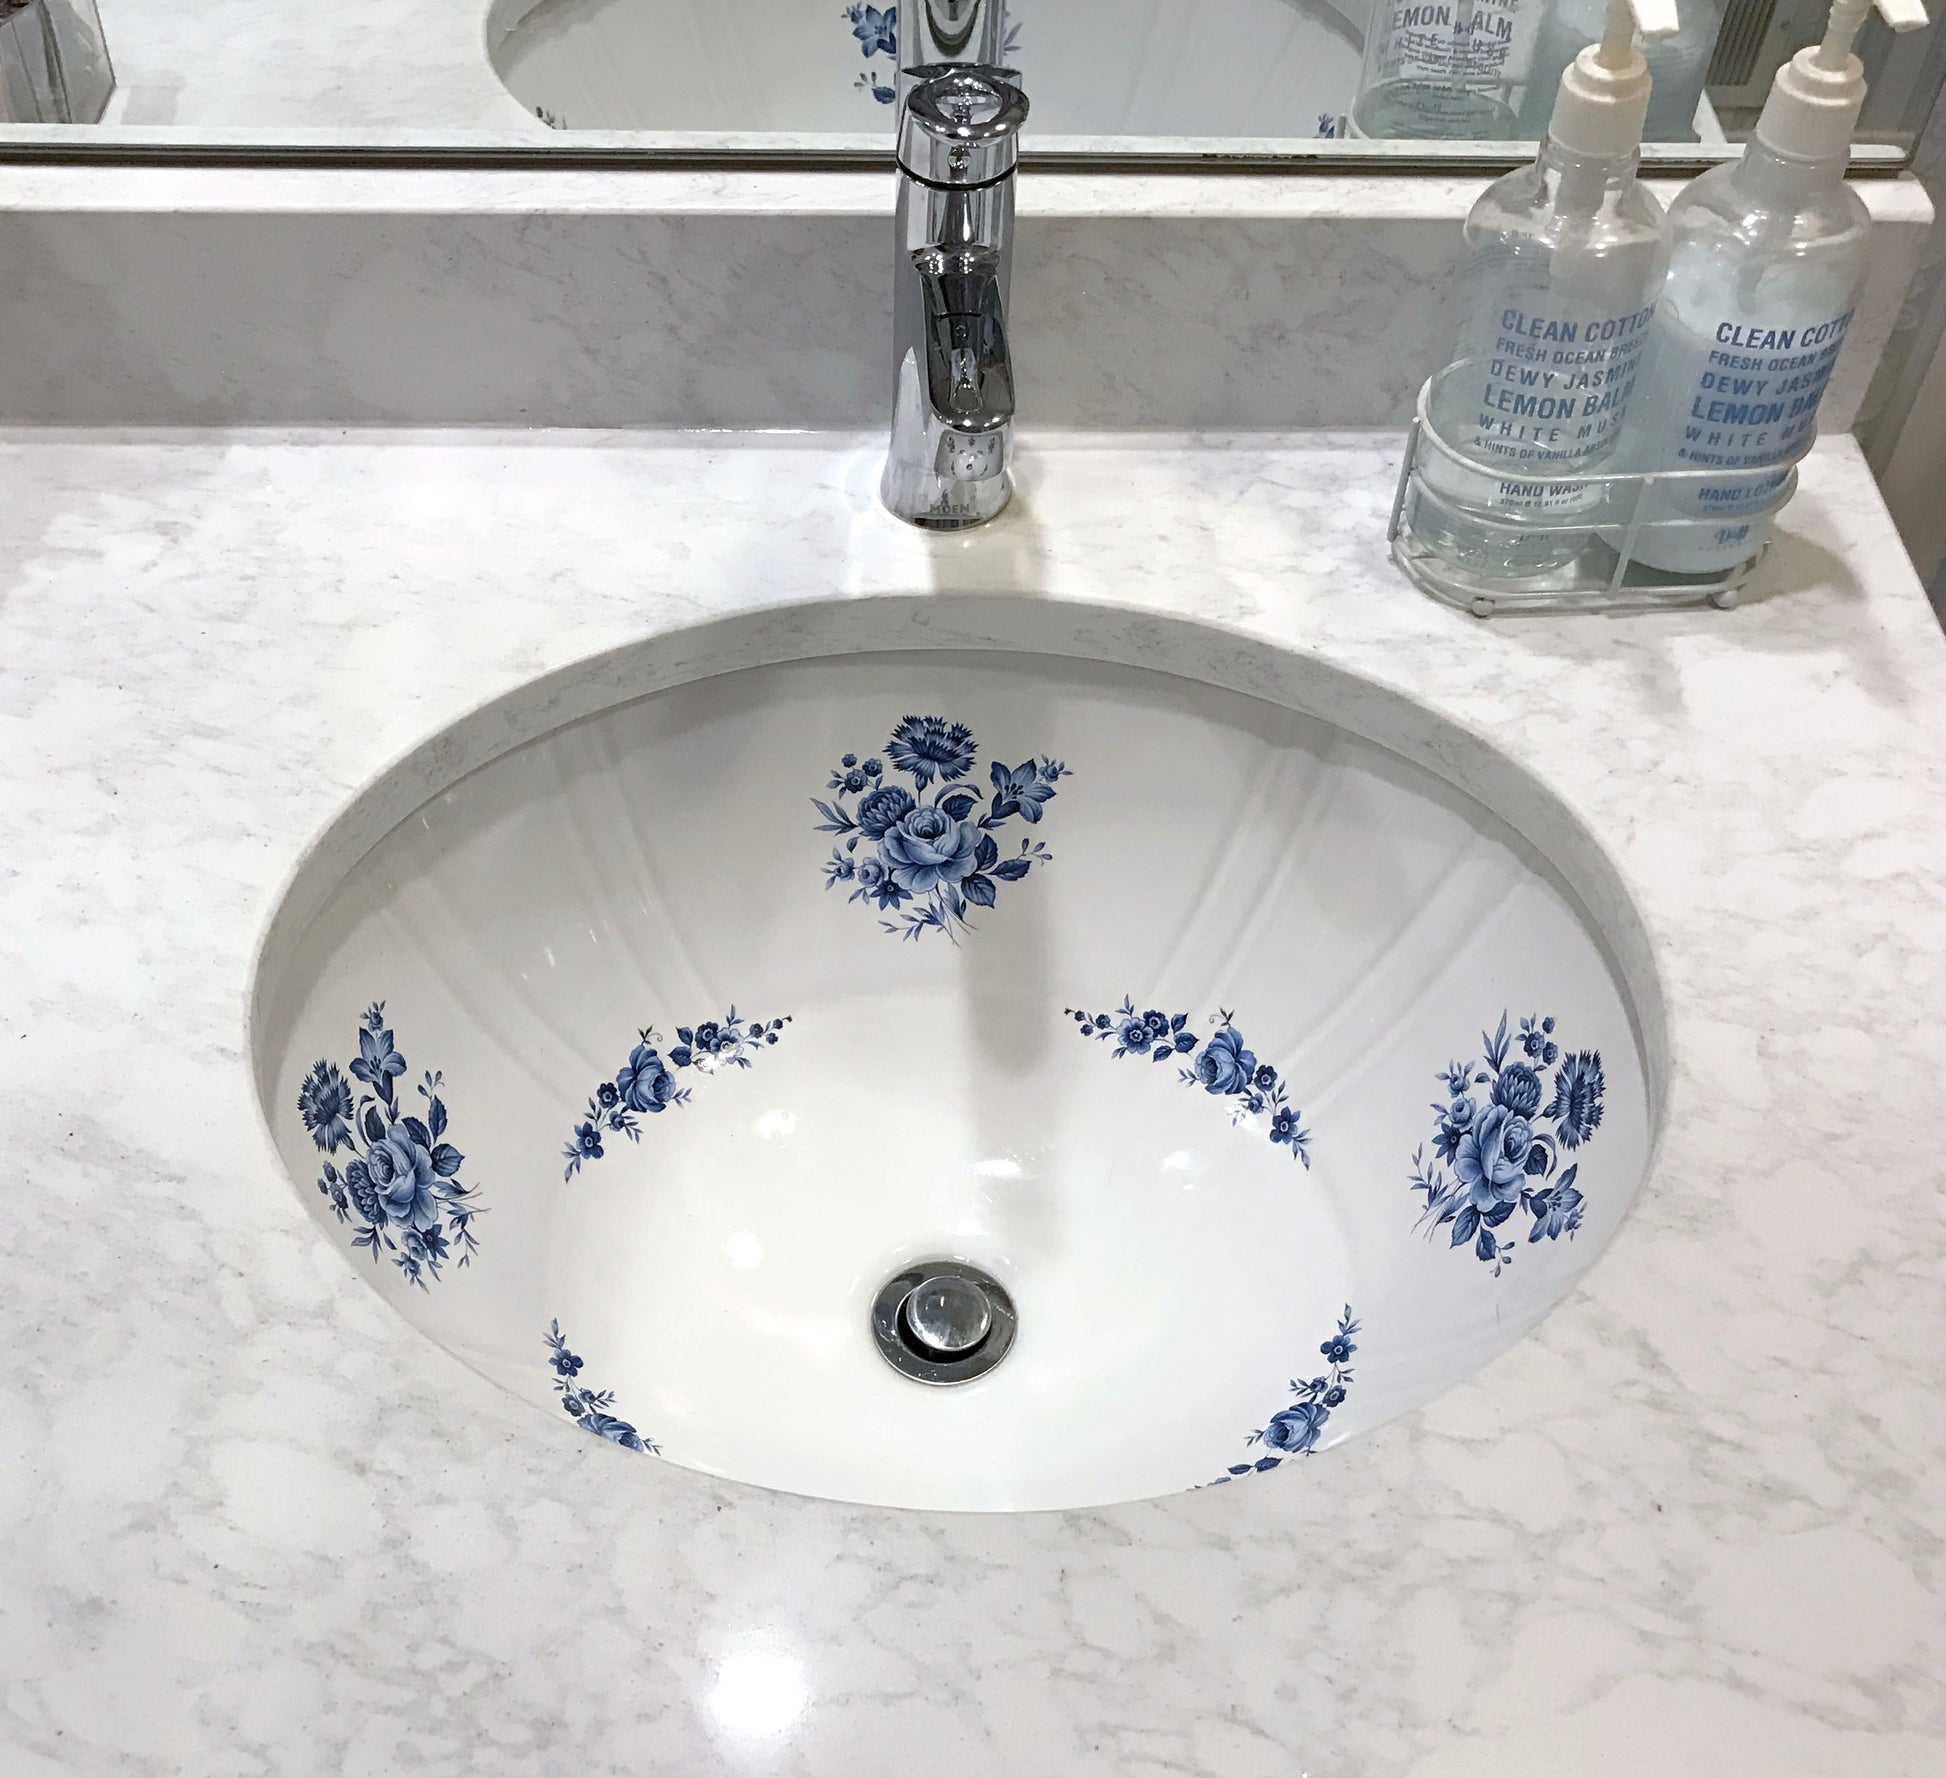 Fluted undermount bathroom sink painted with blue roses in white marble counter